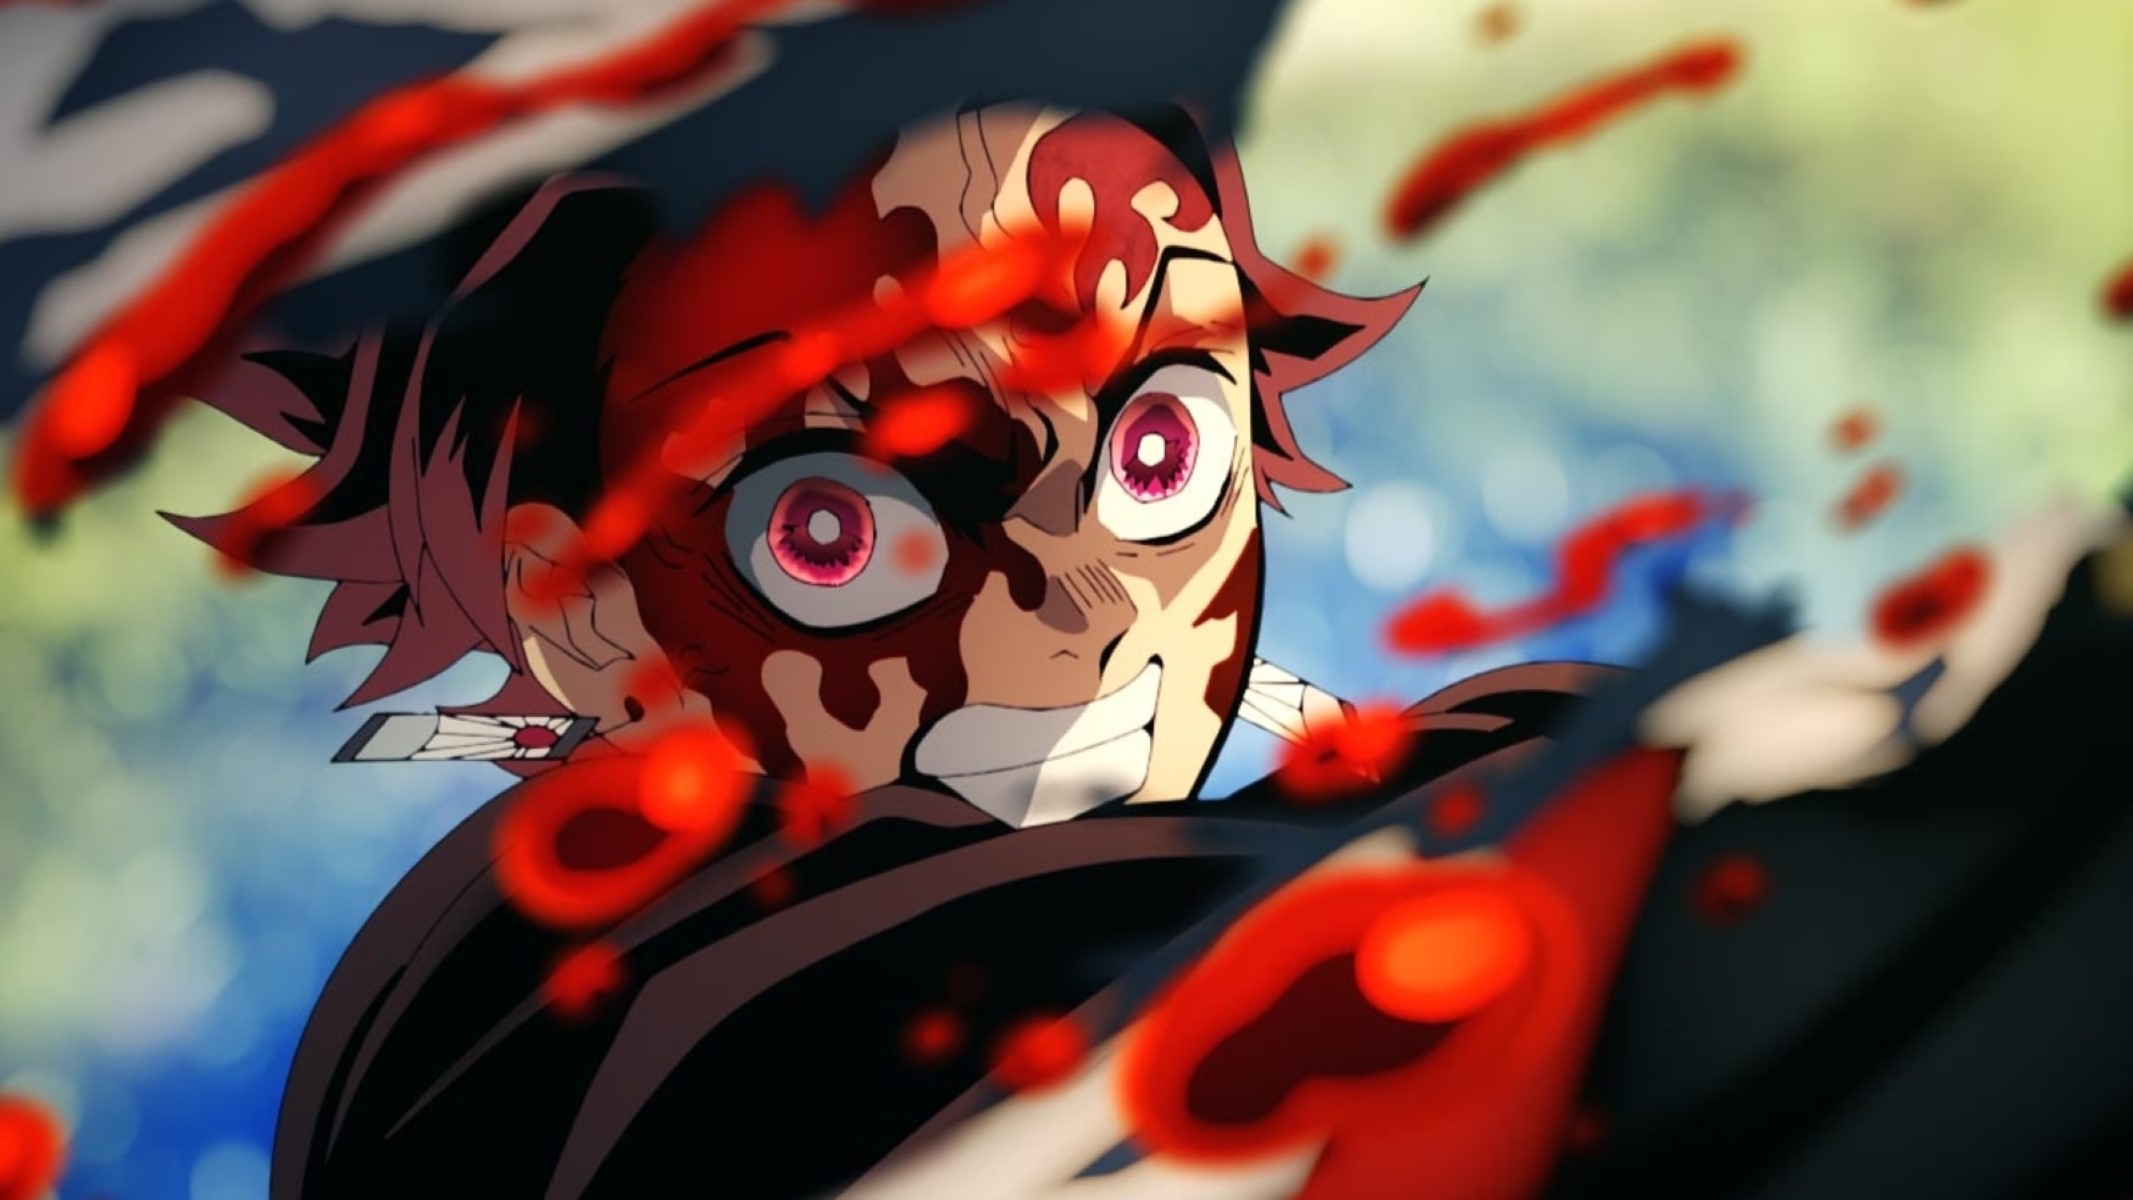 Unbelievable Animation In Demon Slayer: A Visual Masterpiece!